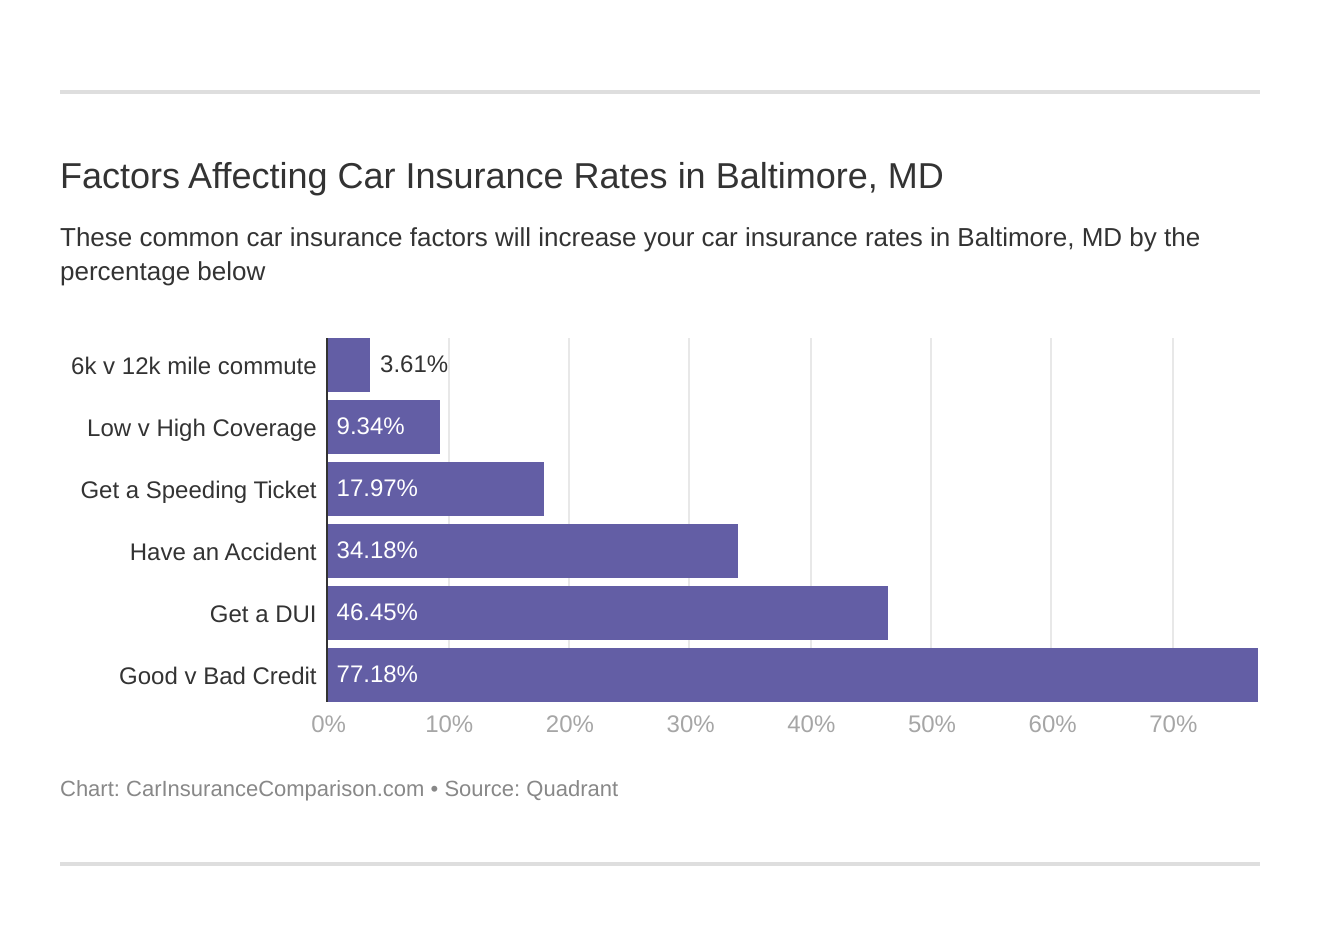 Factors Affecting Car Insurance Rates in Baltimore, MD